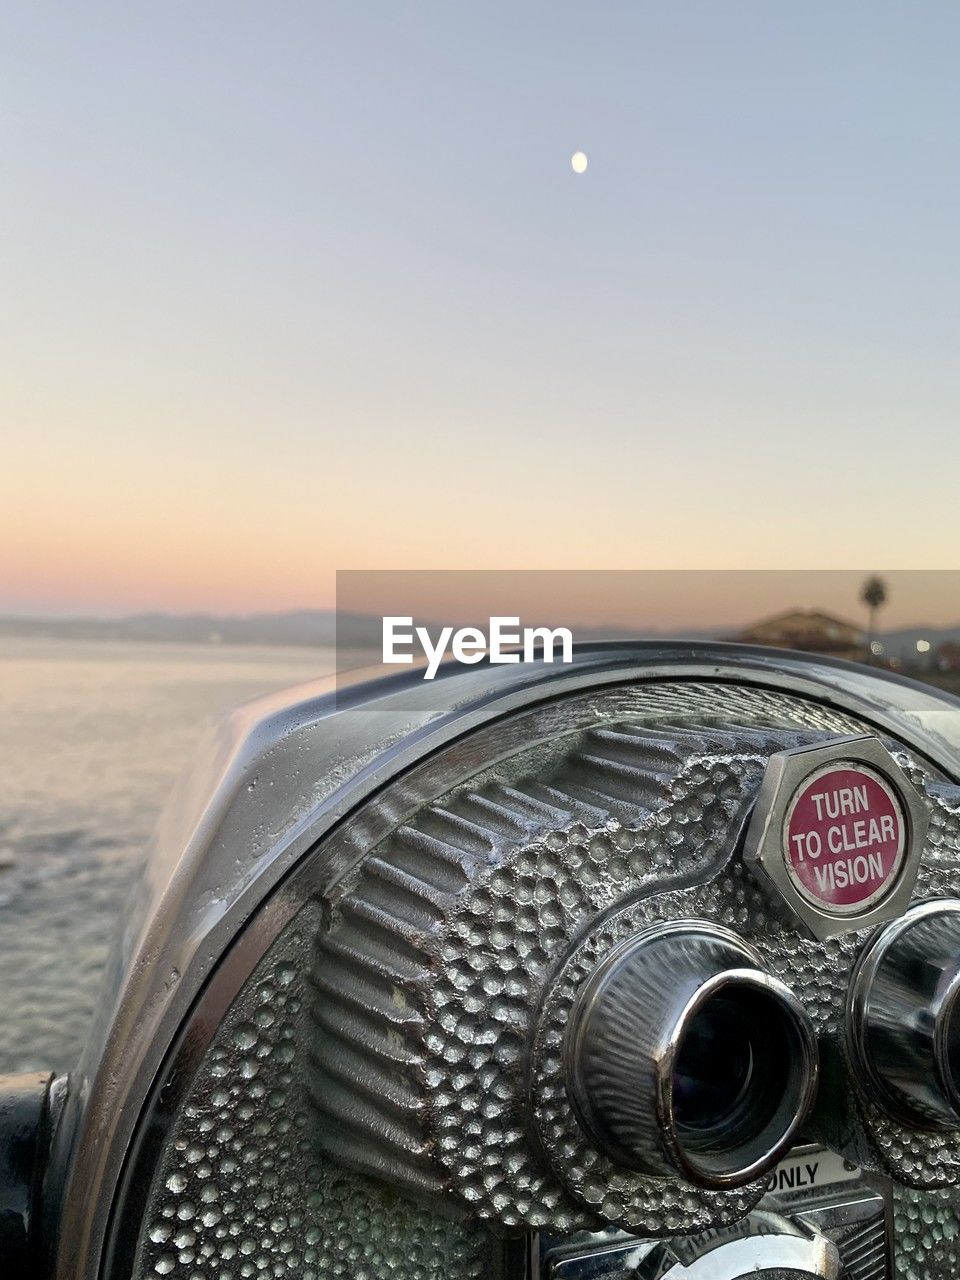 sky, vehicle, nature, sea, transportation, water, no people, sunset, mode of transportation, scenics - nature, binoculars, travel, car, close-up, astronomy, wheel, beauty in nature, outdoors, horizon, clear sky, metal, coin operated, moon, coin-operated binoculars